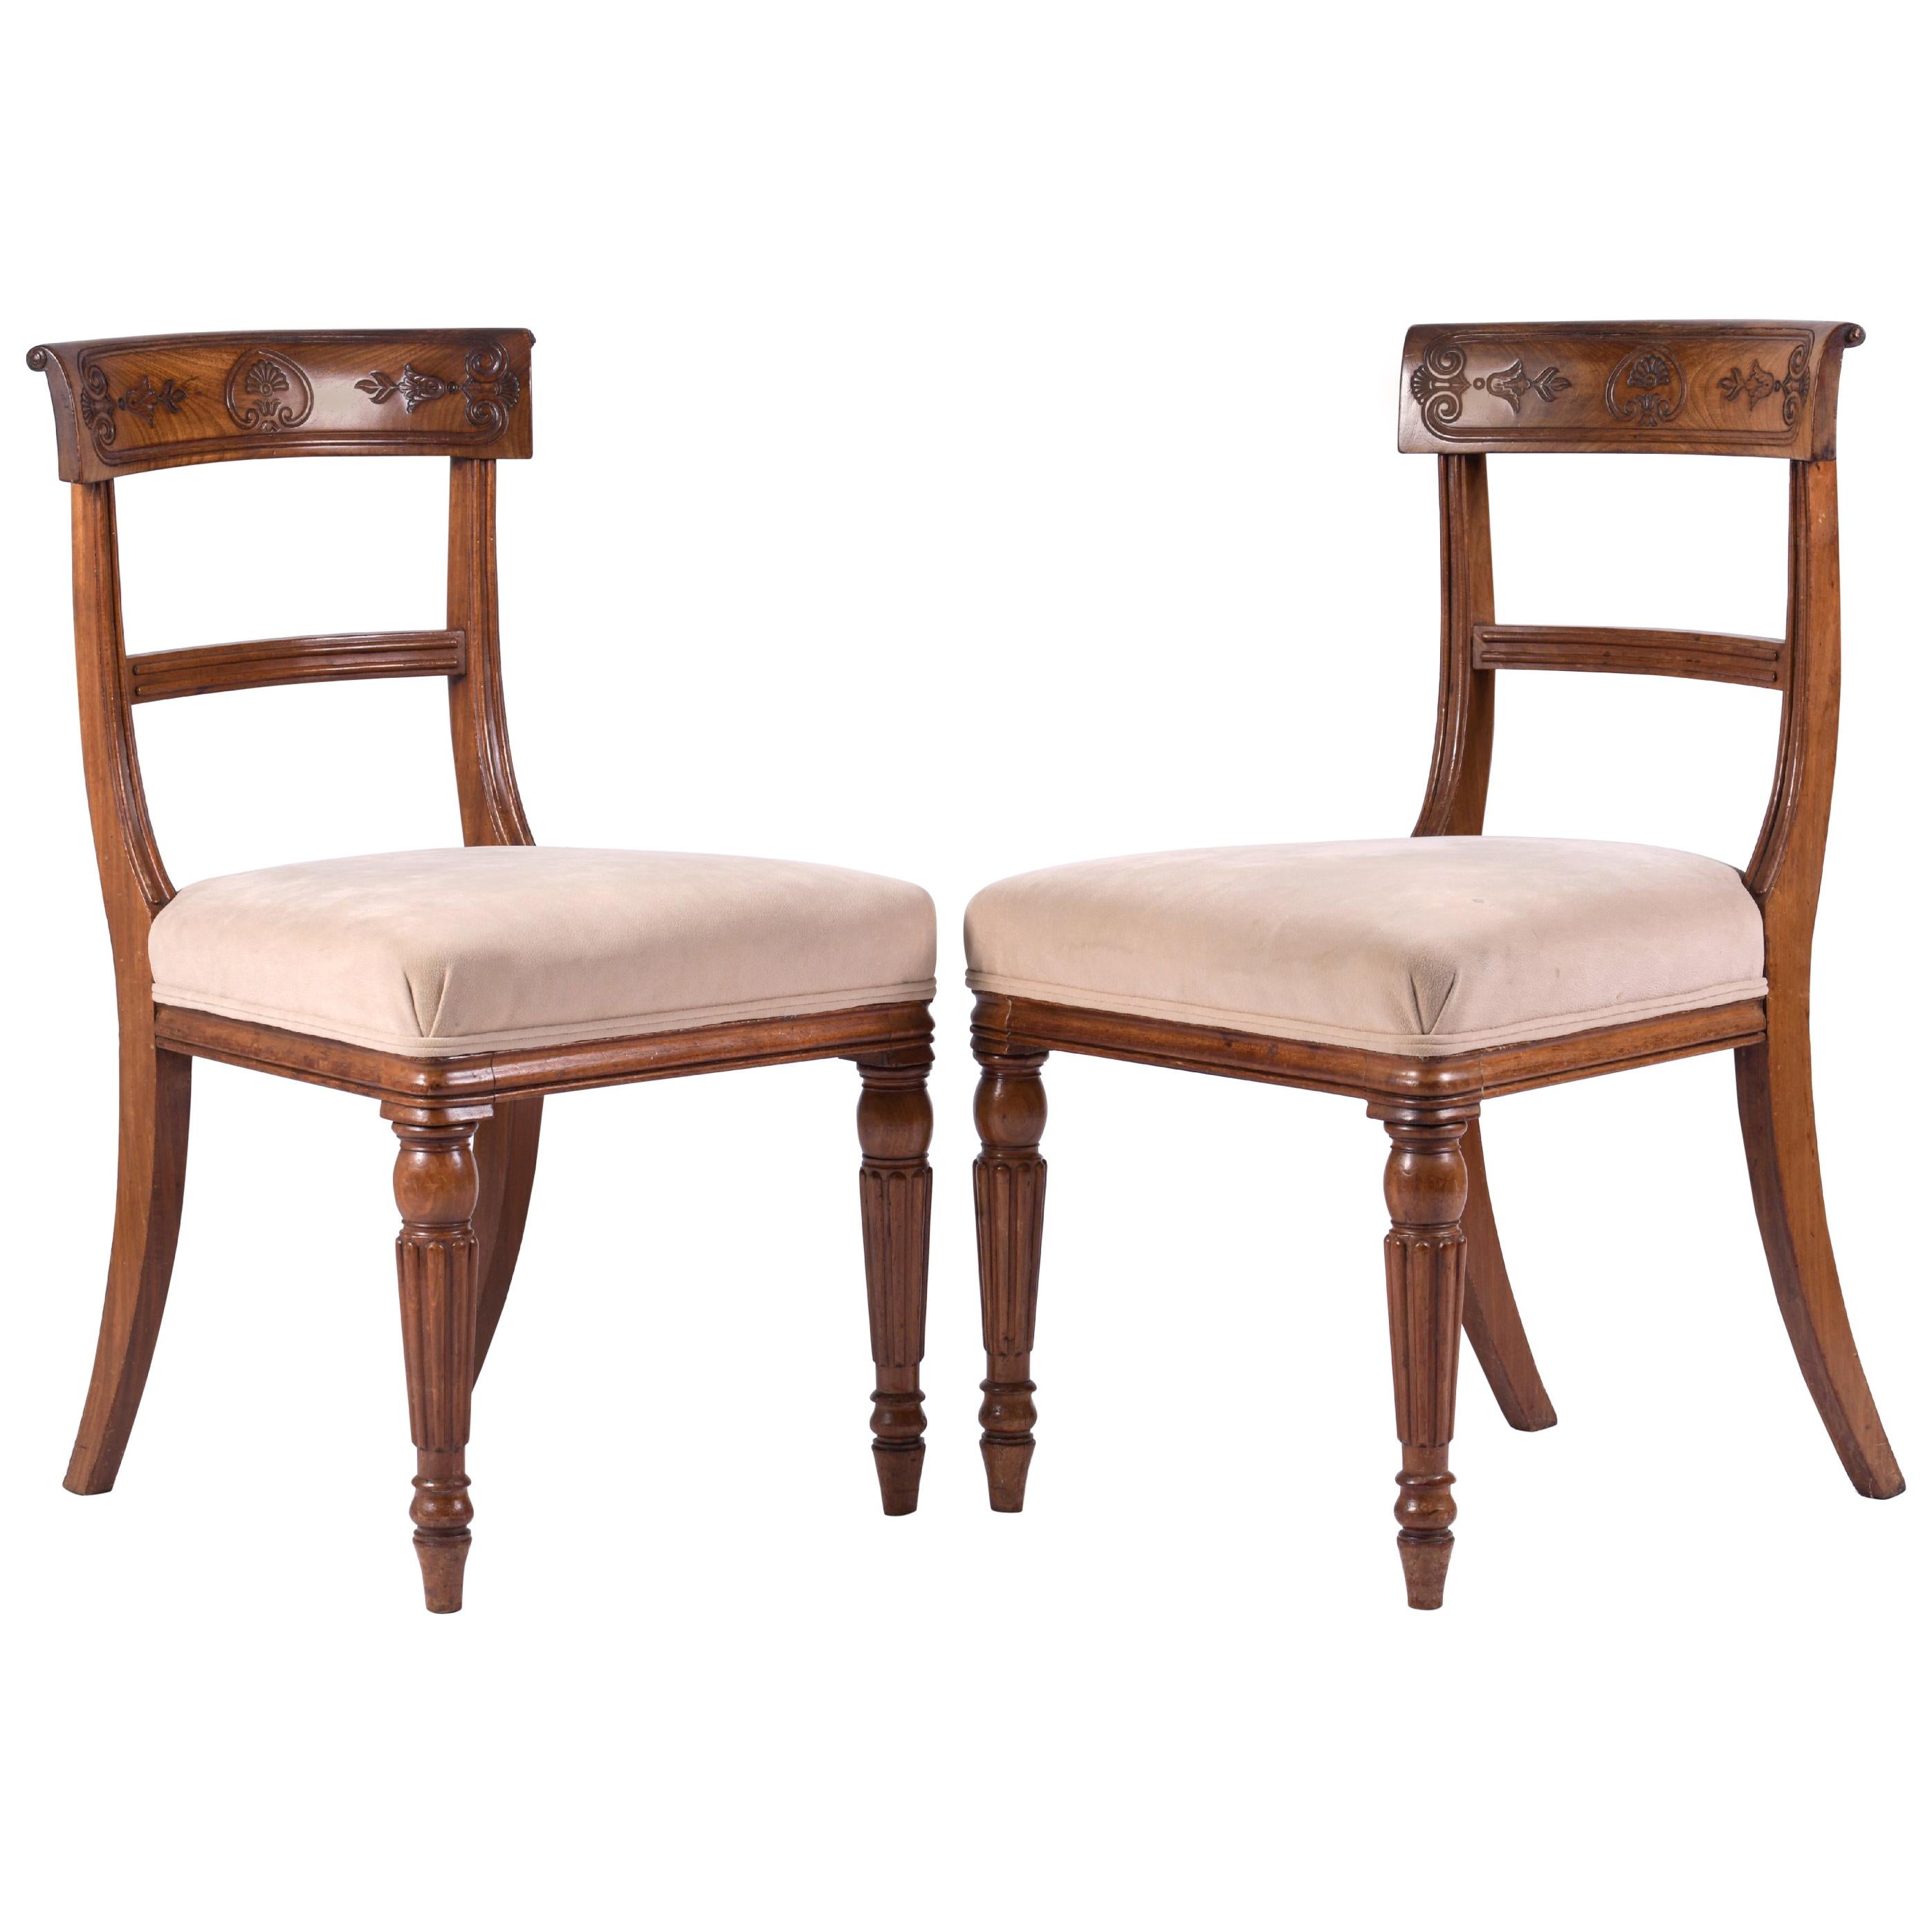 Set of 6 George IV Mahogany Dining Chairs in the Manner of Gillows